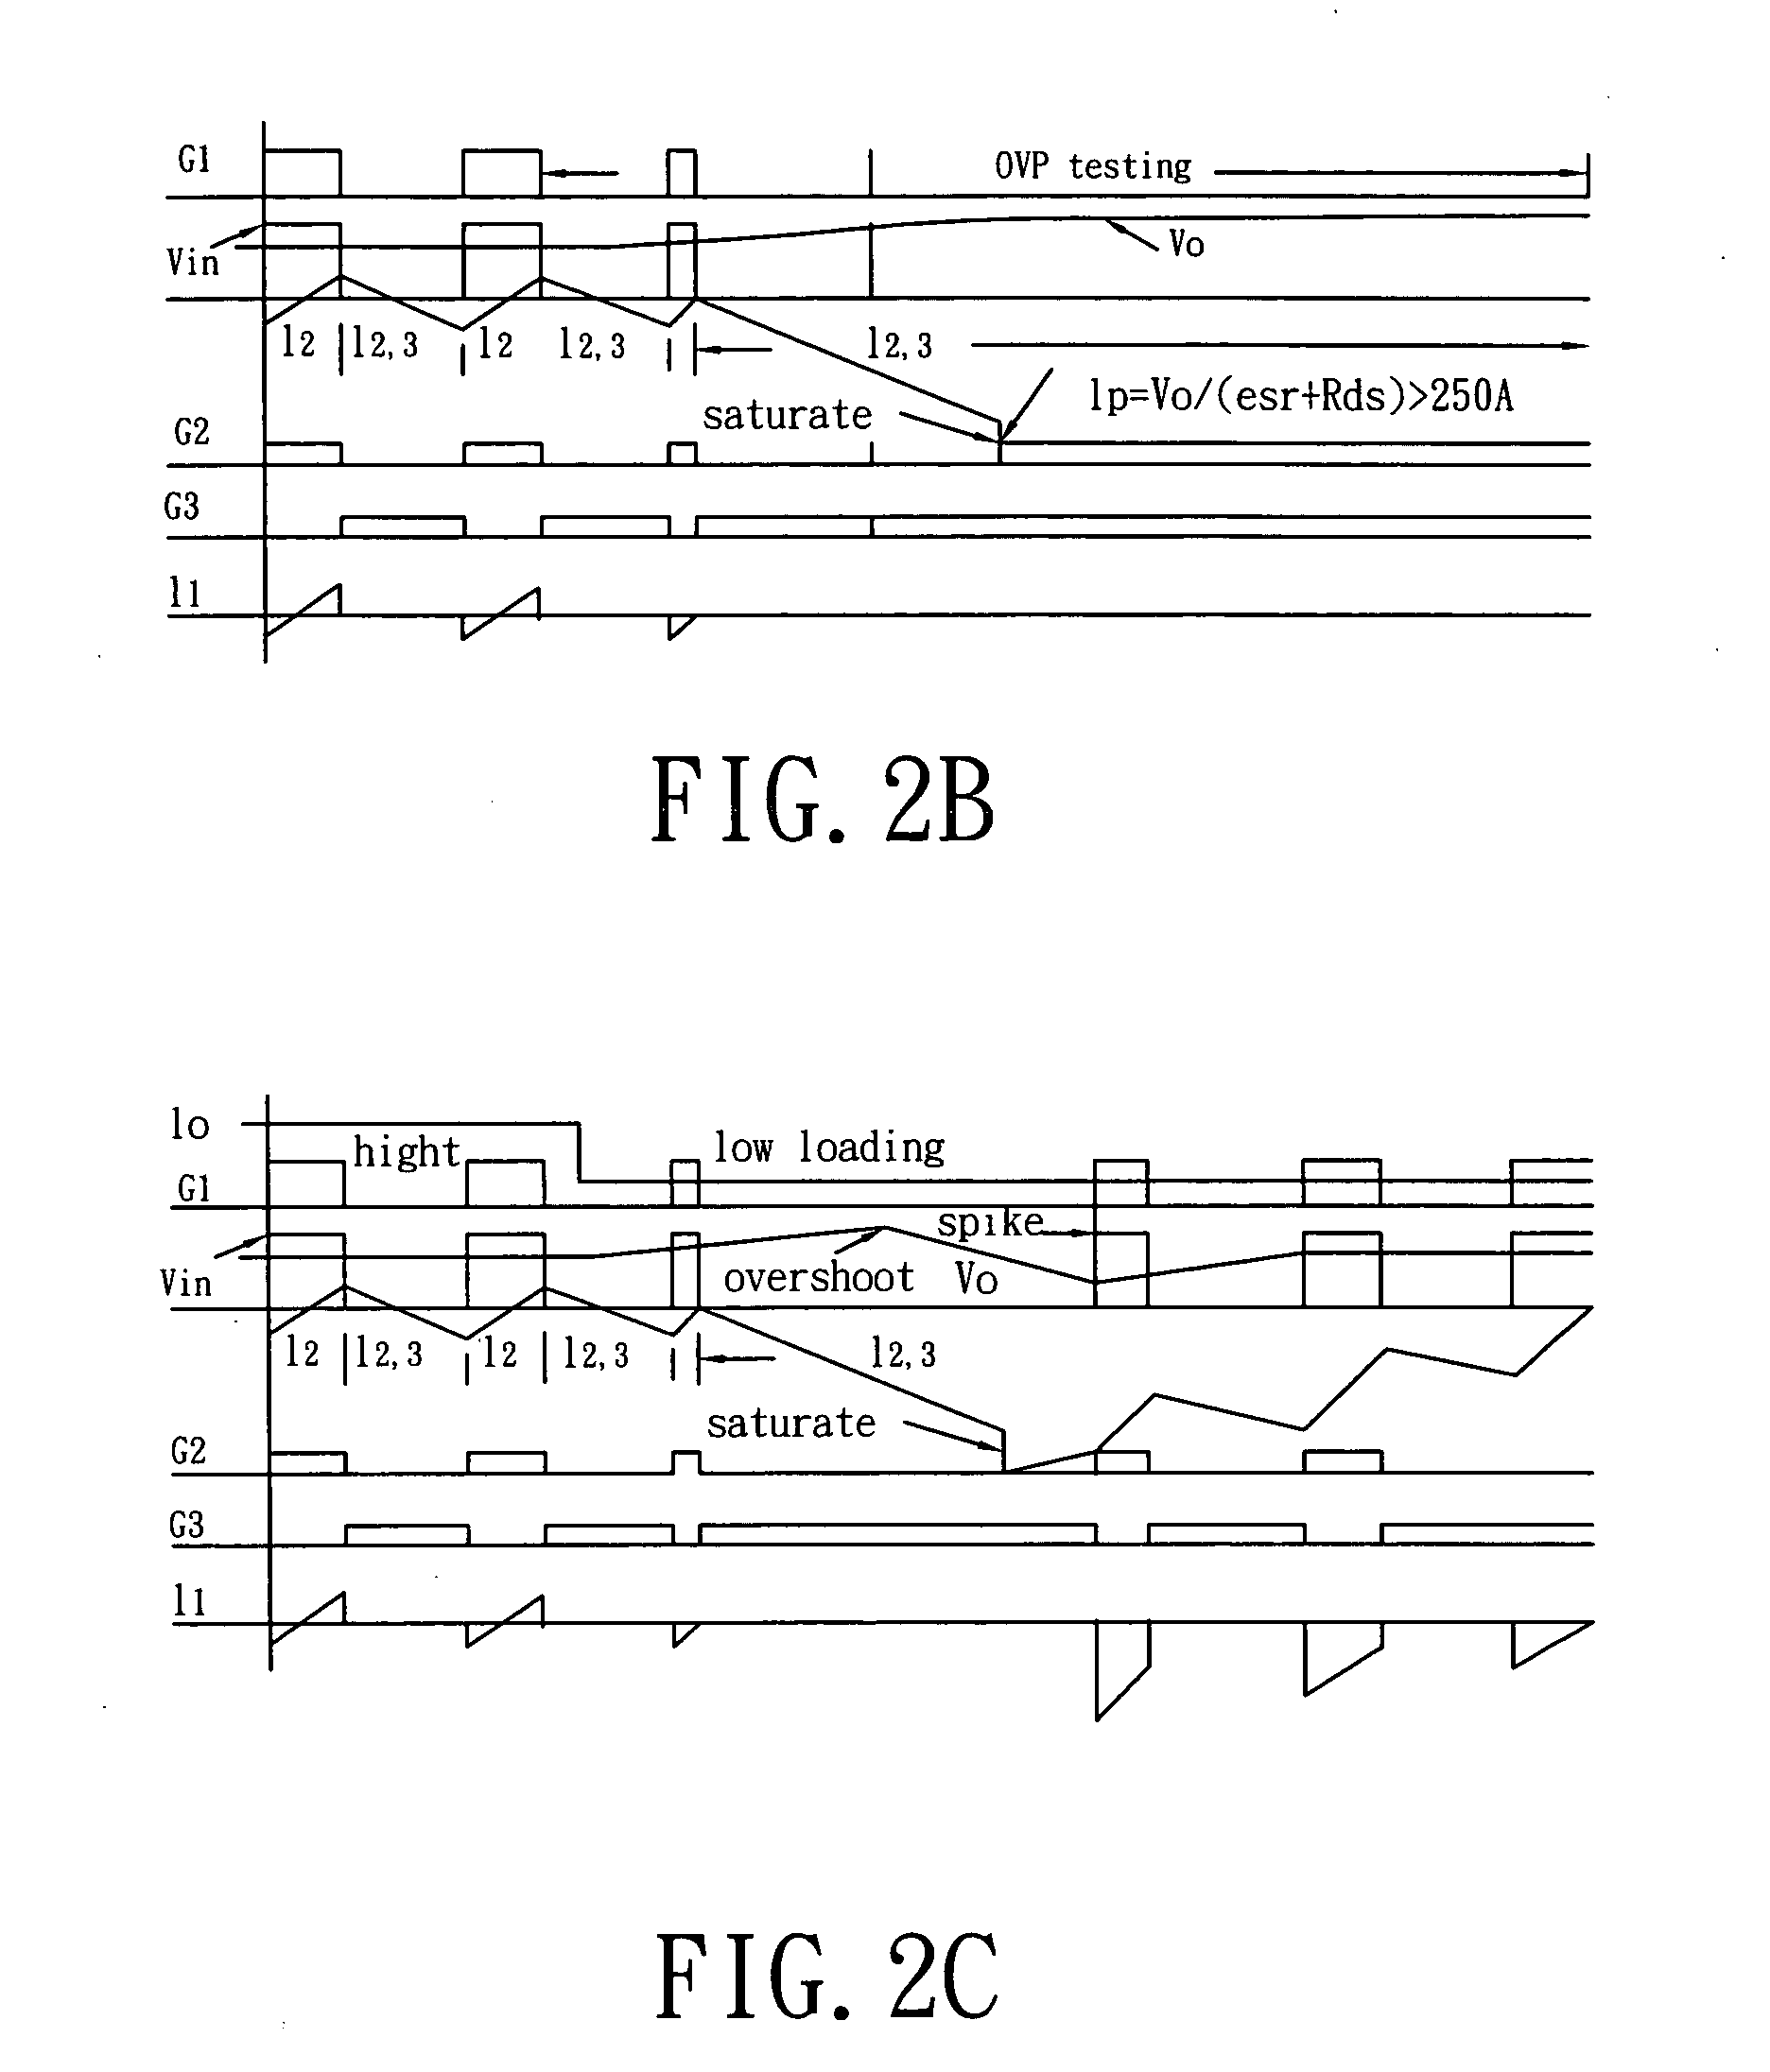 Forward converter with synchronous rectifier and reverse current control